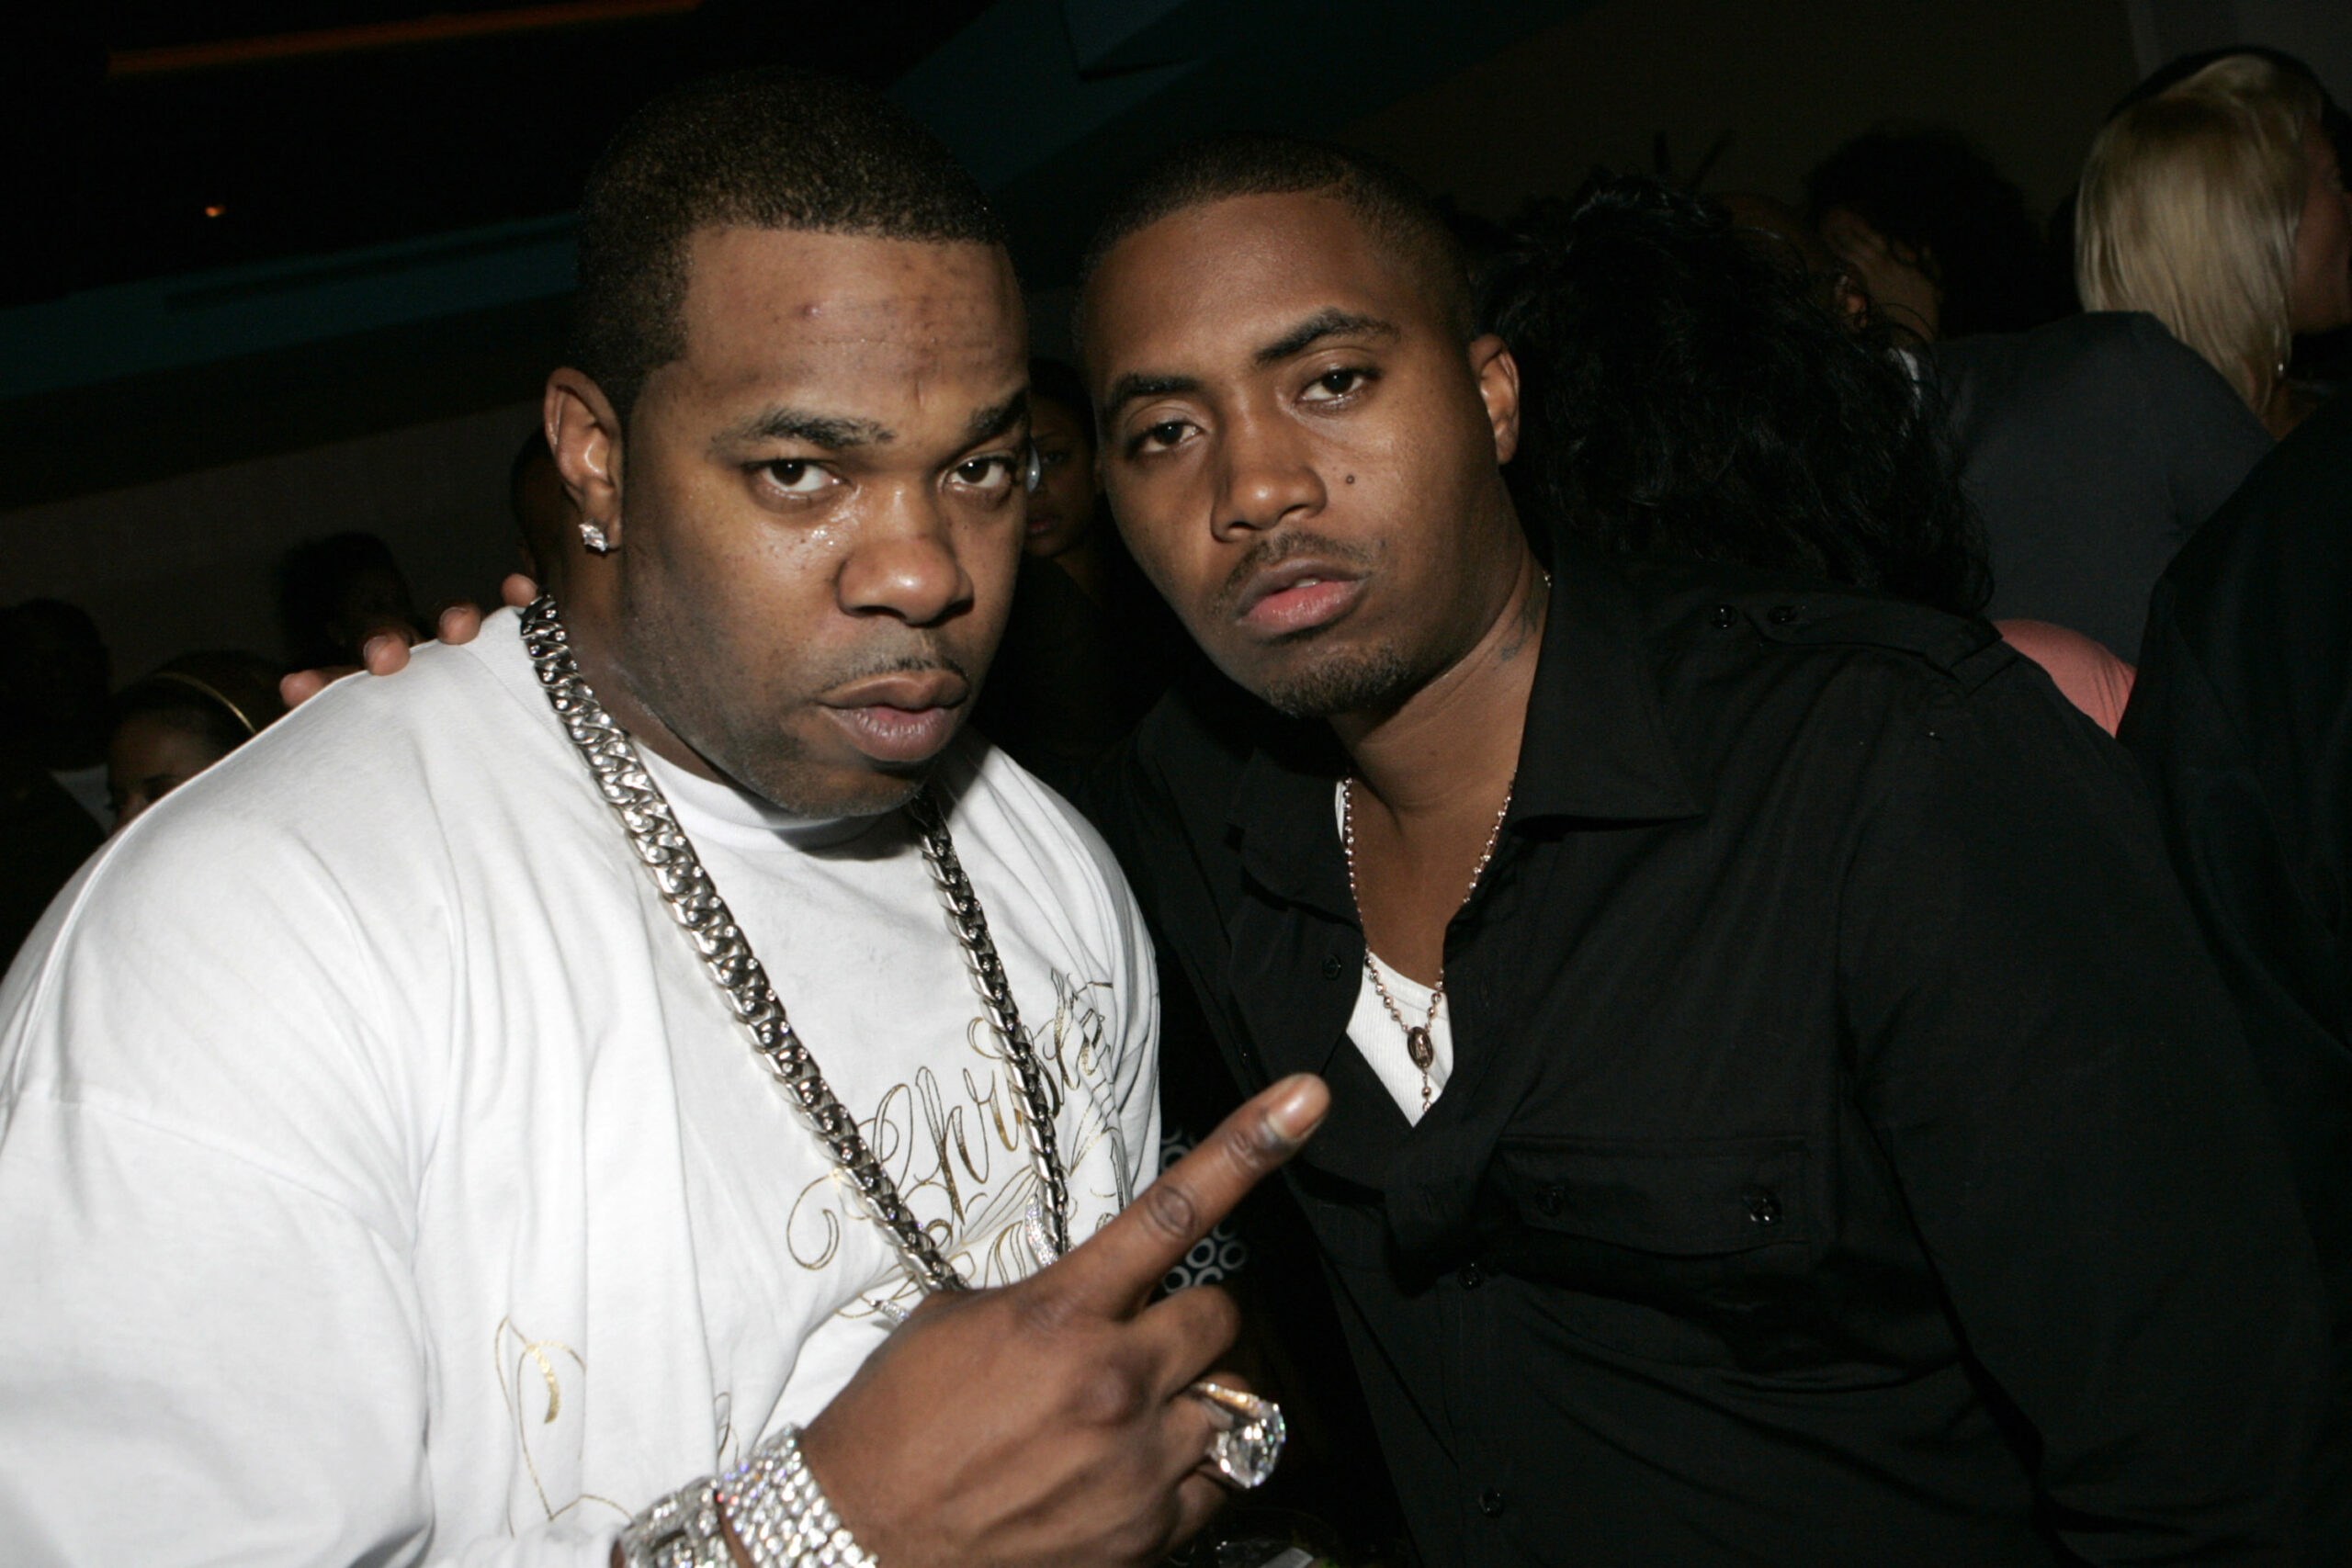 Nas & Busta Rhymes’ Music Leads To Investigation Into New Jersey Judge’s TikToks